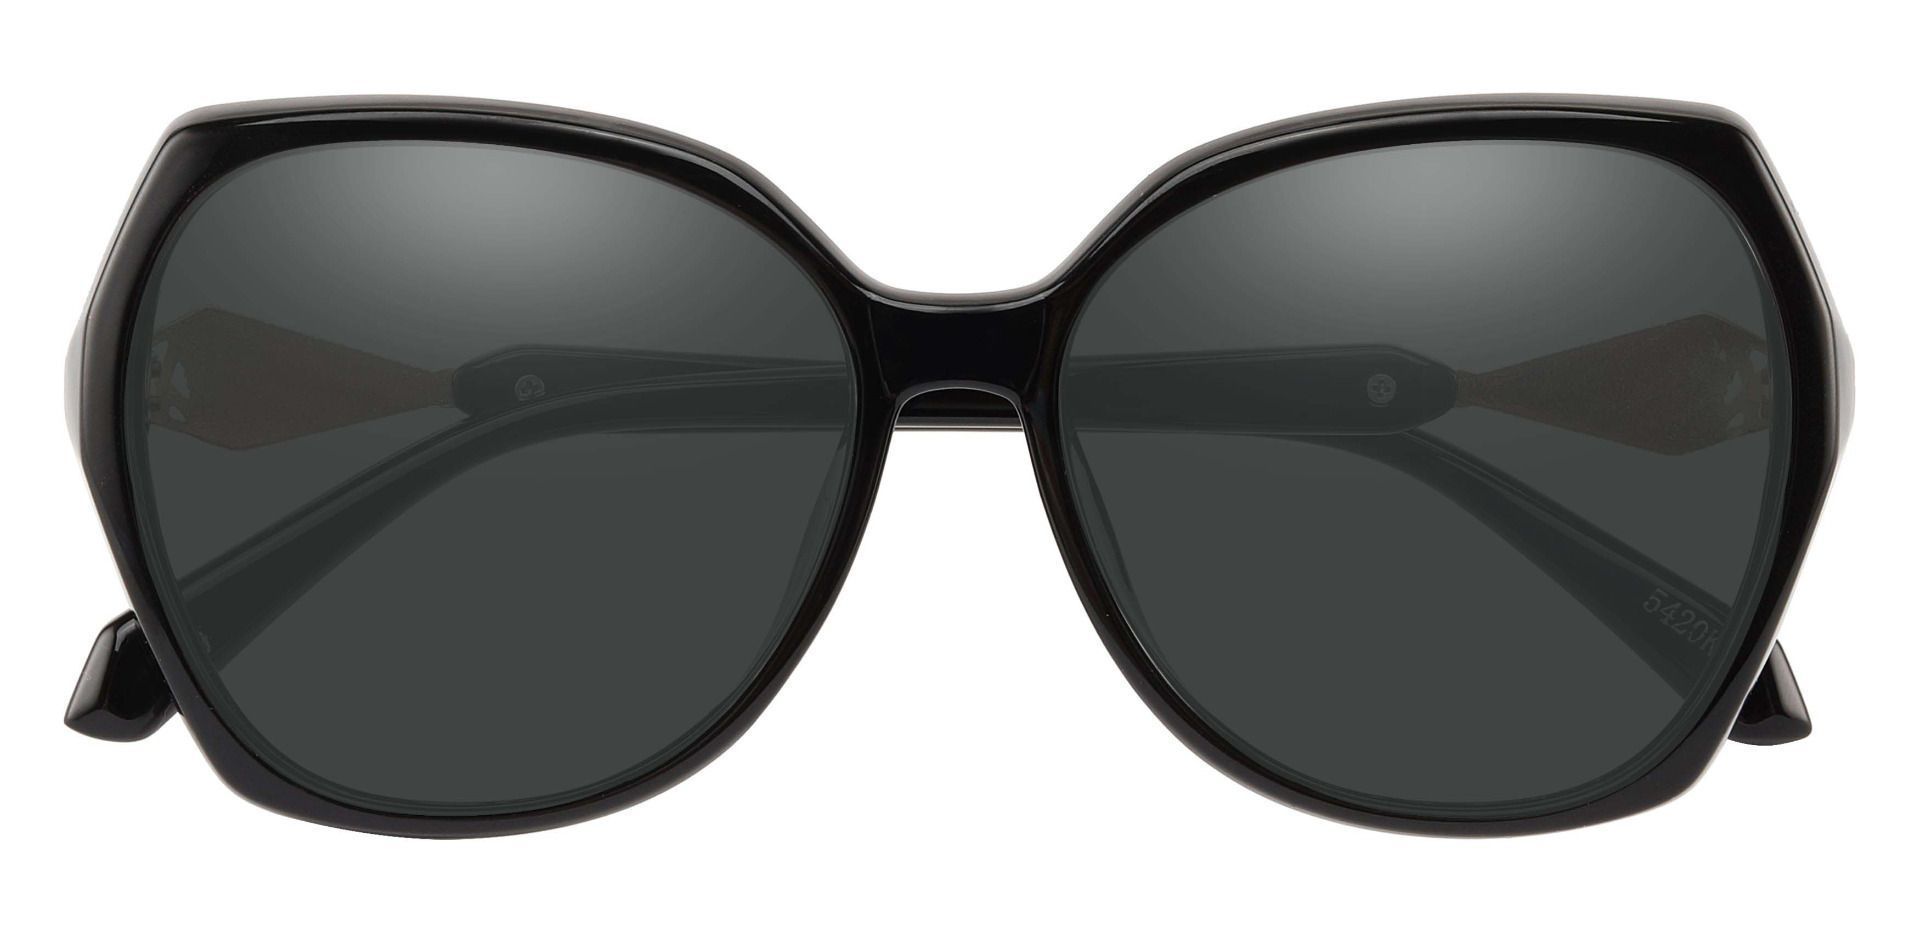 Solitaire Geometric Reading Sunglasses - Black Frame With Gray Lenses